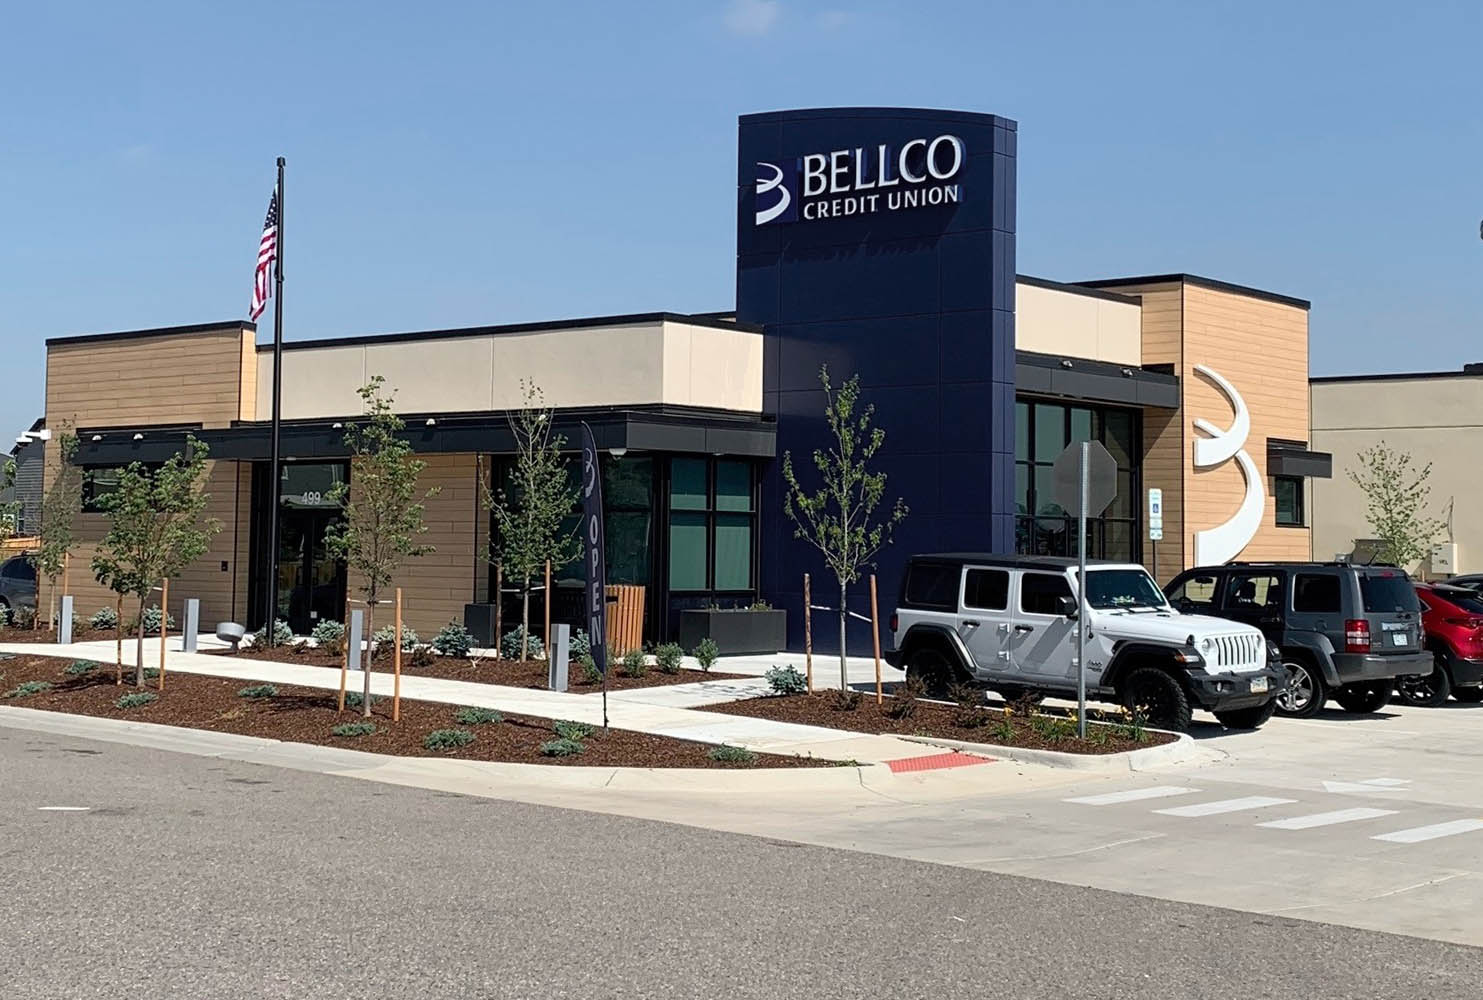 Visit the Bellco Credit Union Buckley branch in Aurora, CO